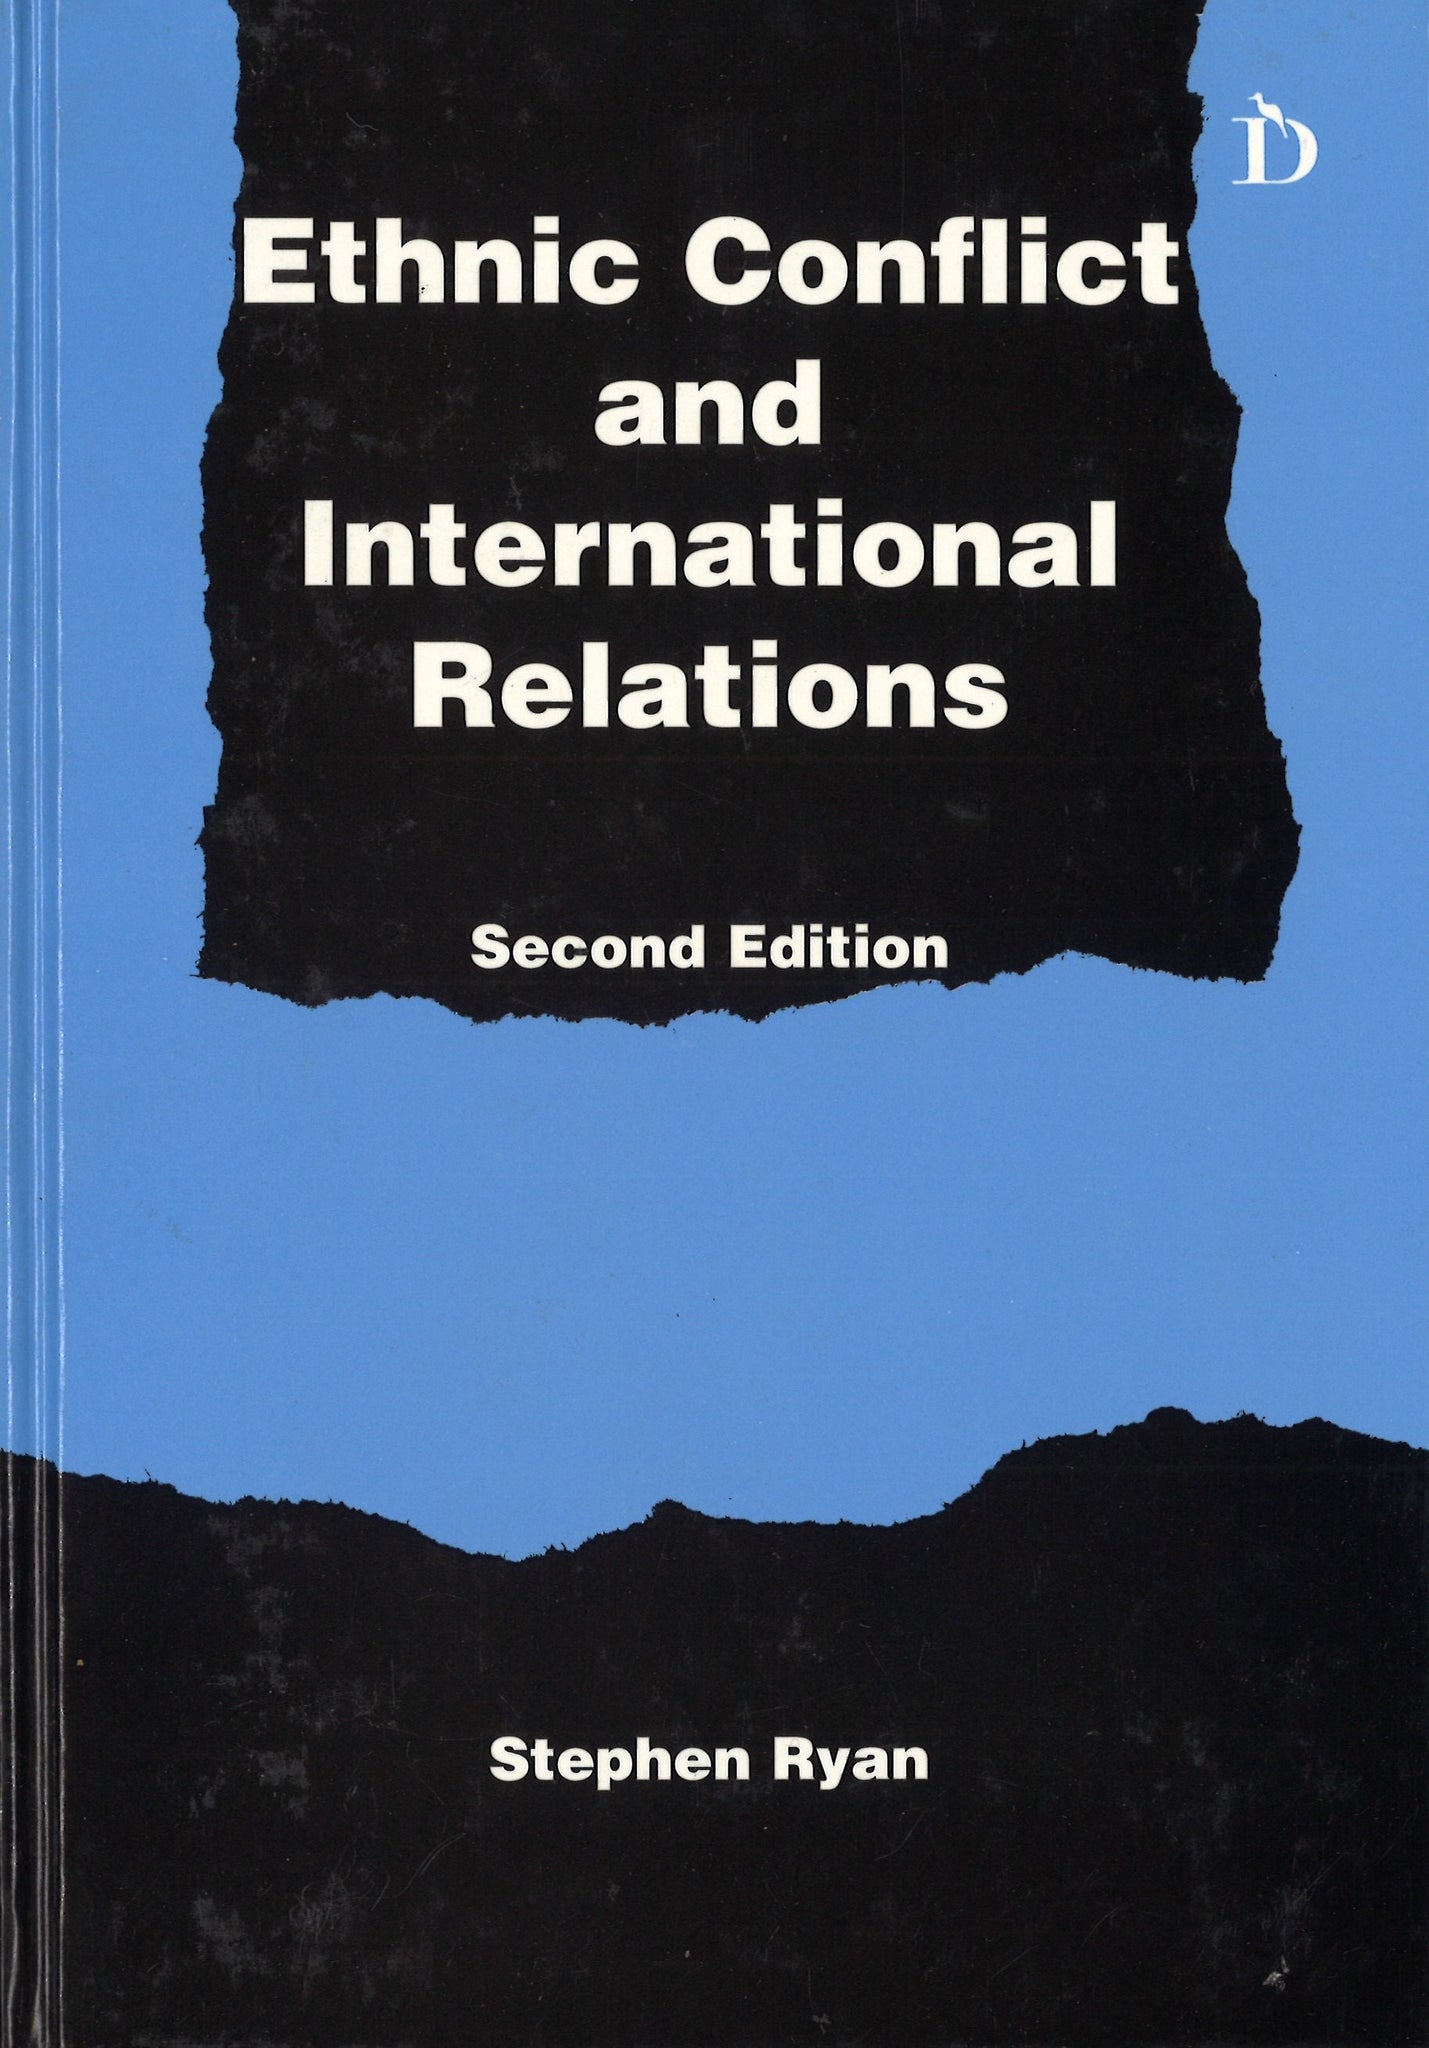 ETHNIC CONFLICT AND INTERNATIONAL RELATIONS